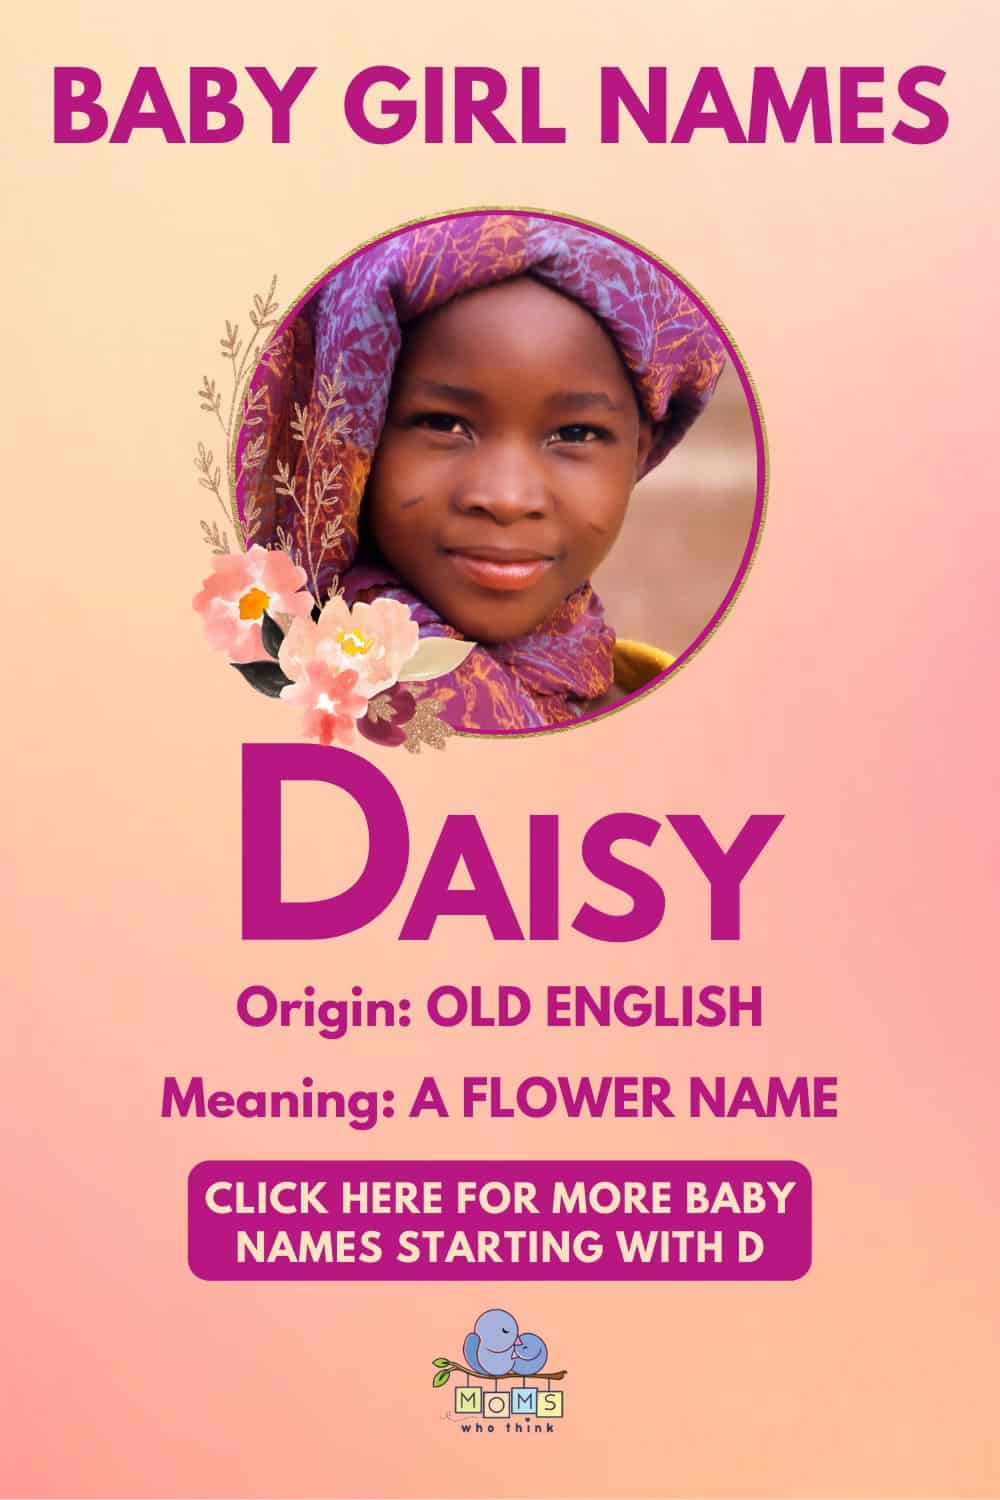 Baby girl name meanings - Daisy